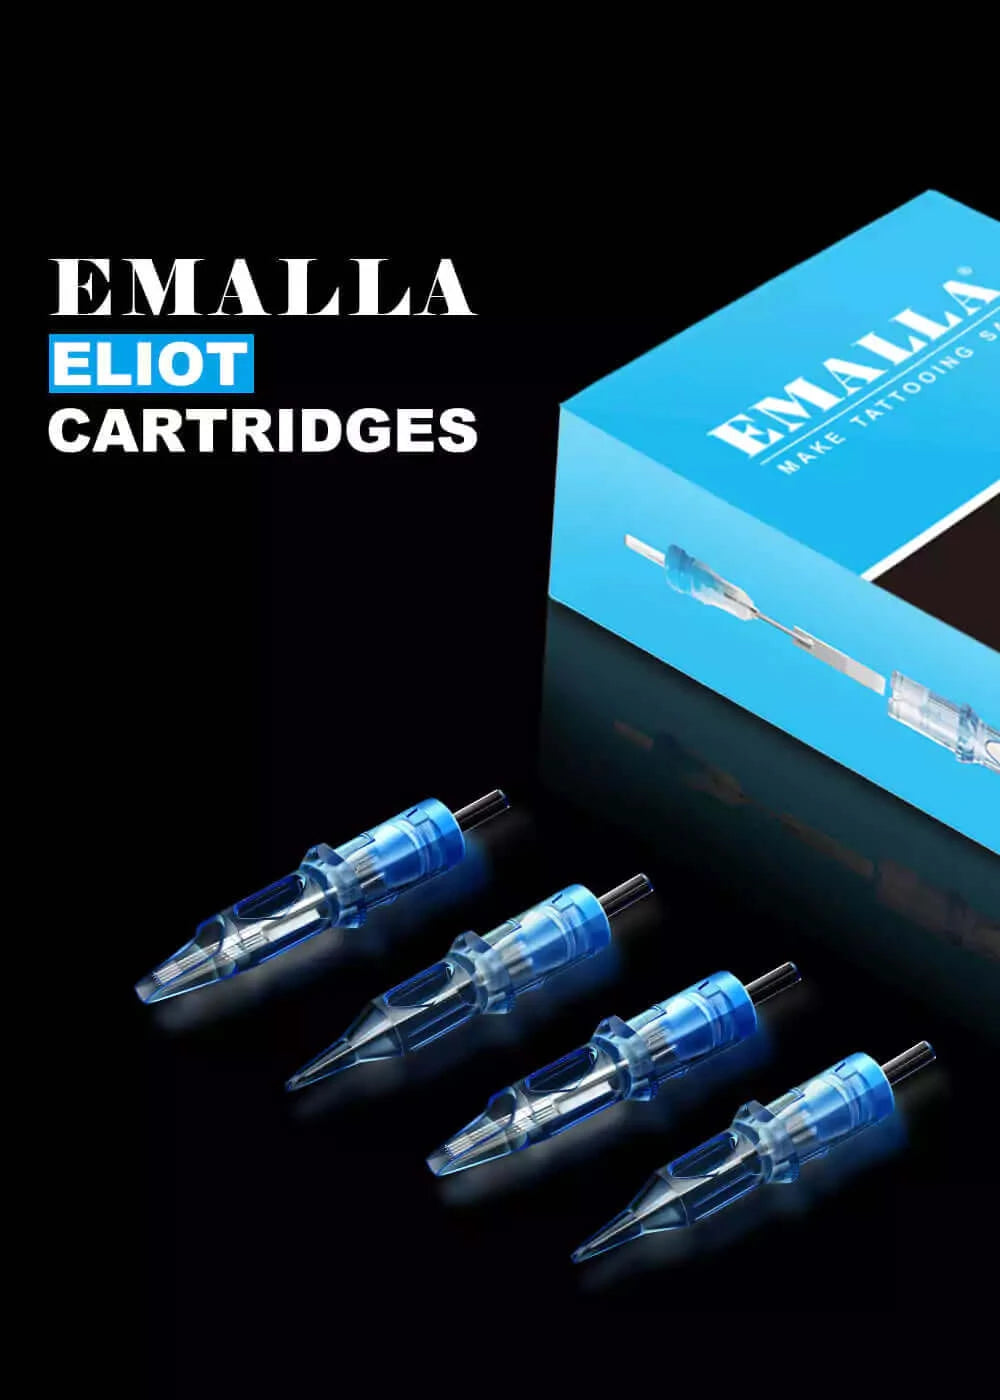 Details of needle tips of four EMALLA ELIOT Cartridges with safe PC material and stainless steel